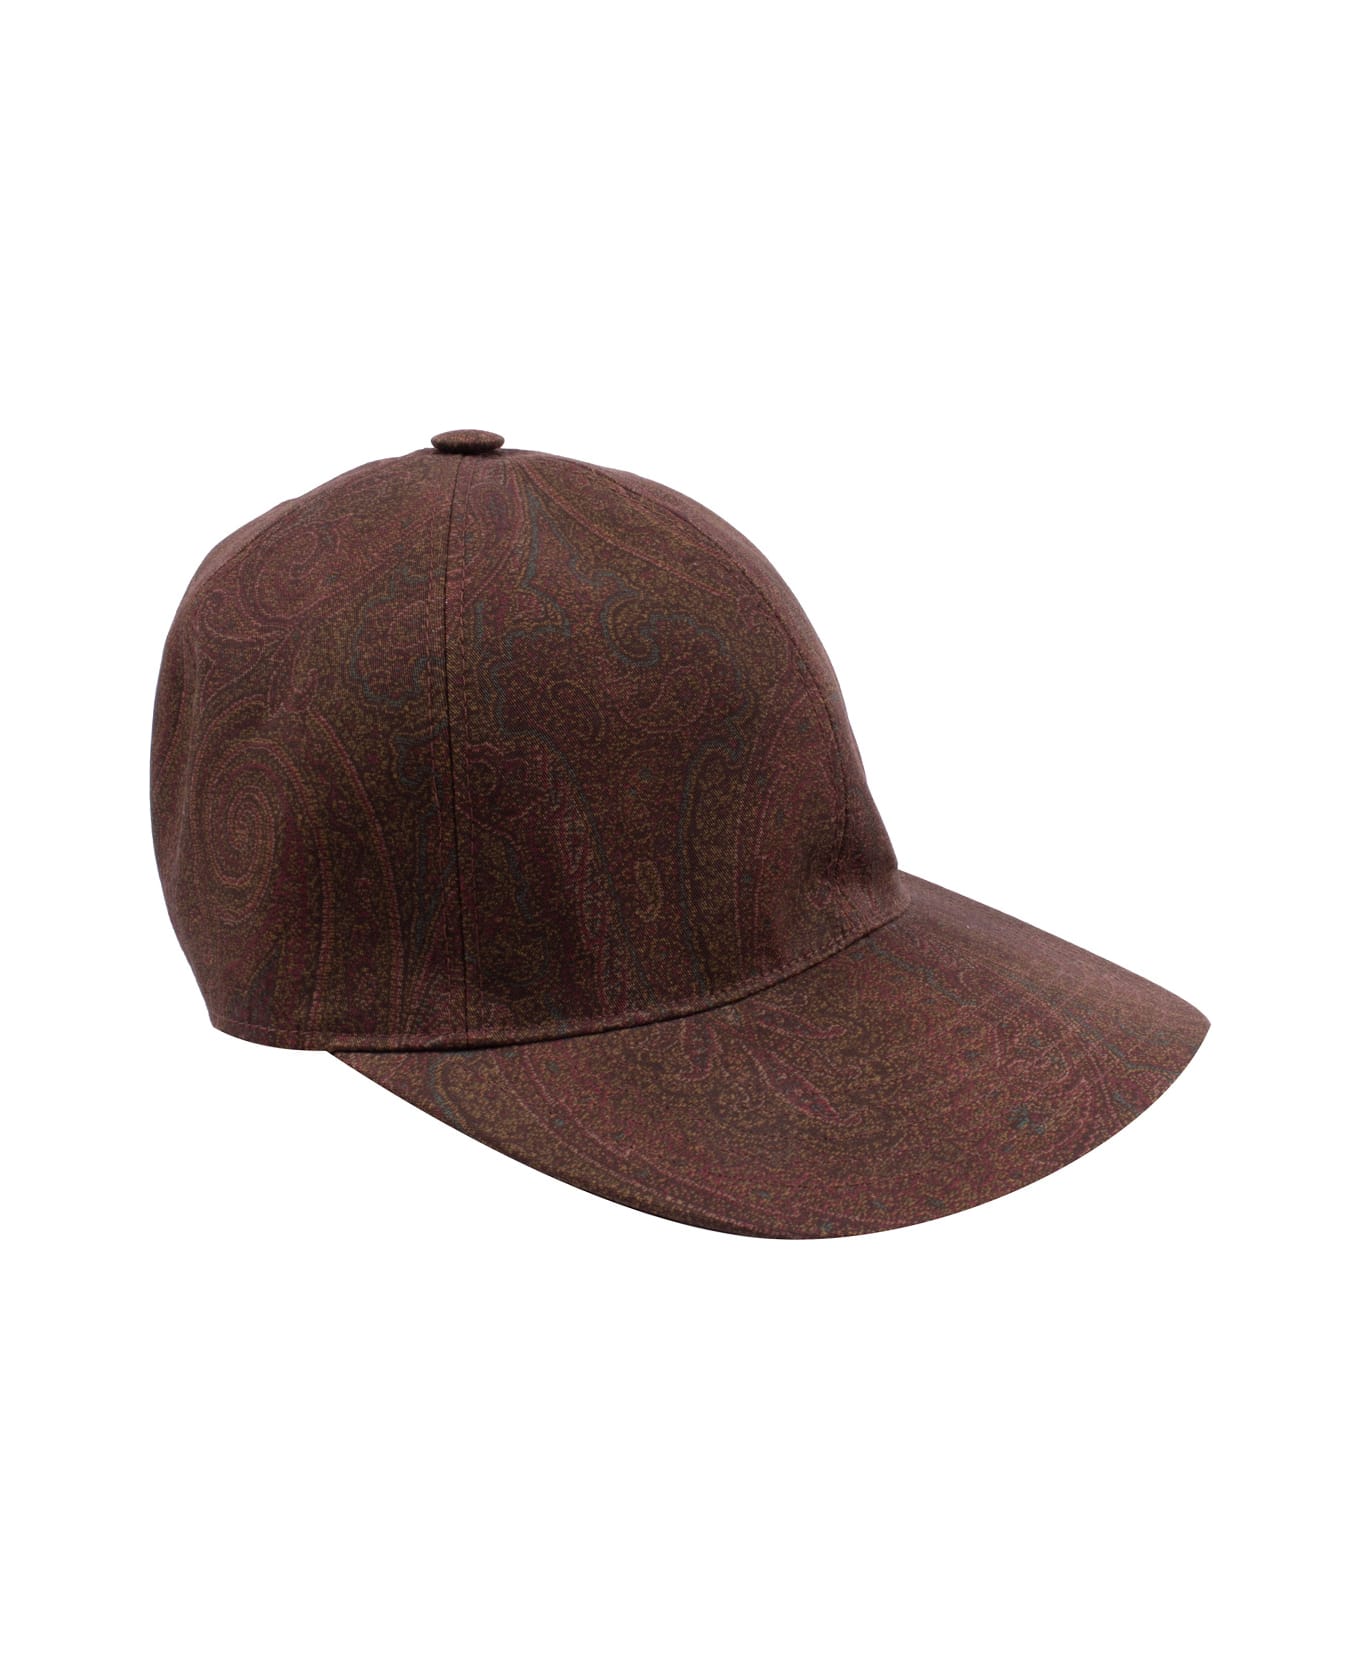 Etro Hat With Paisley Print - Brown 帽子